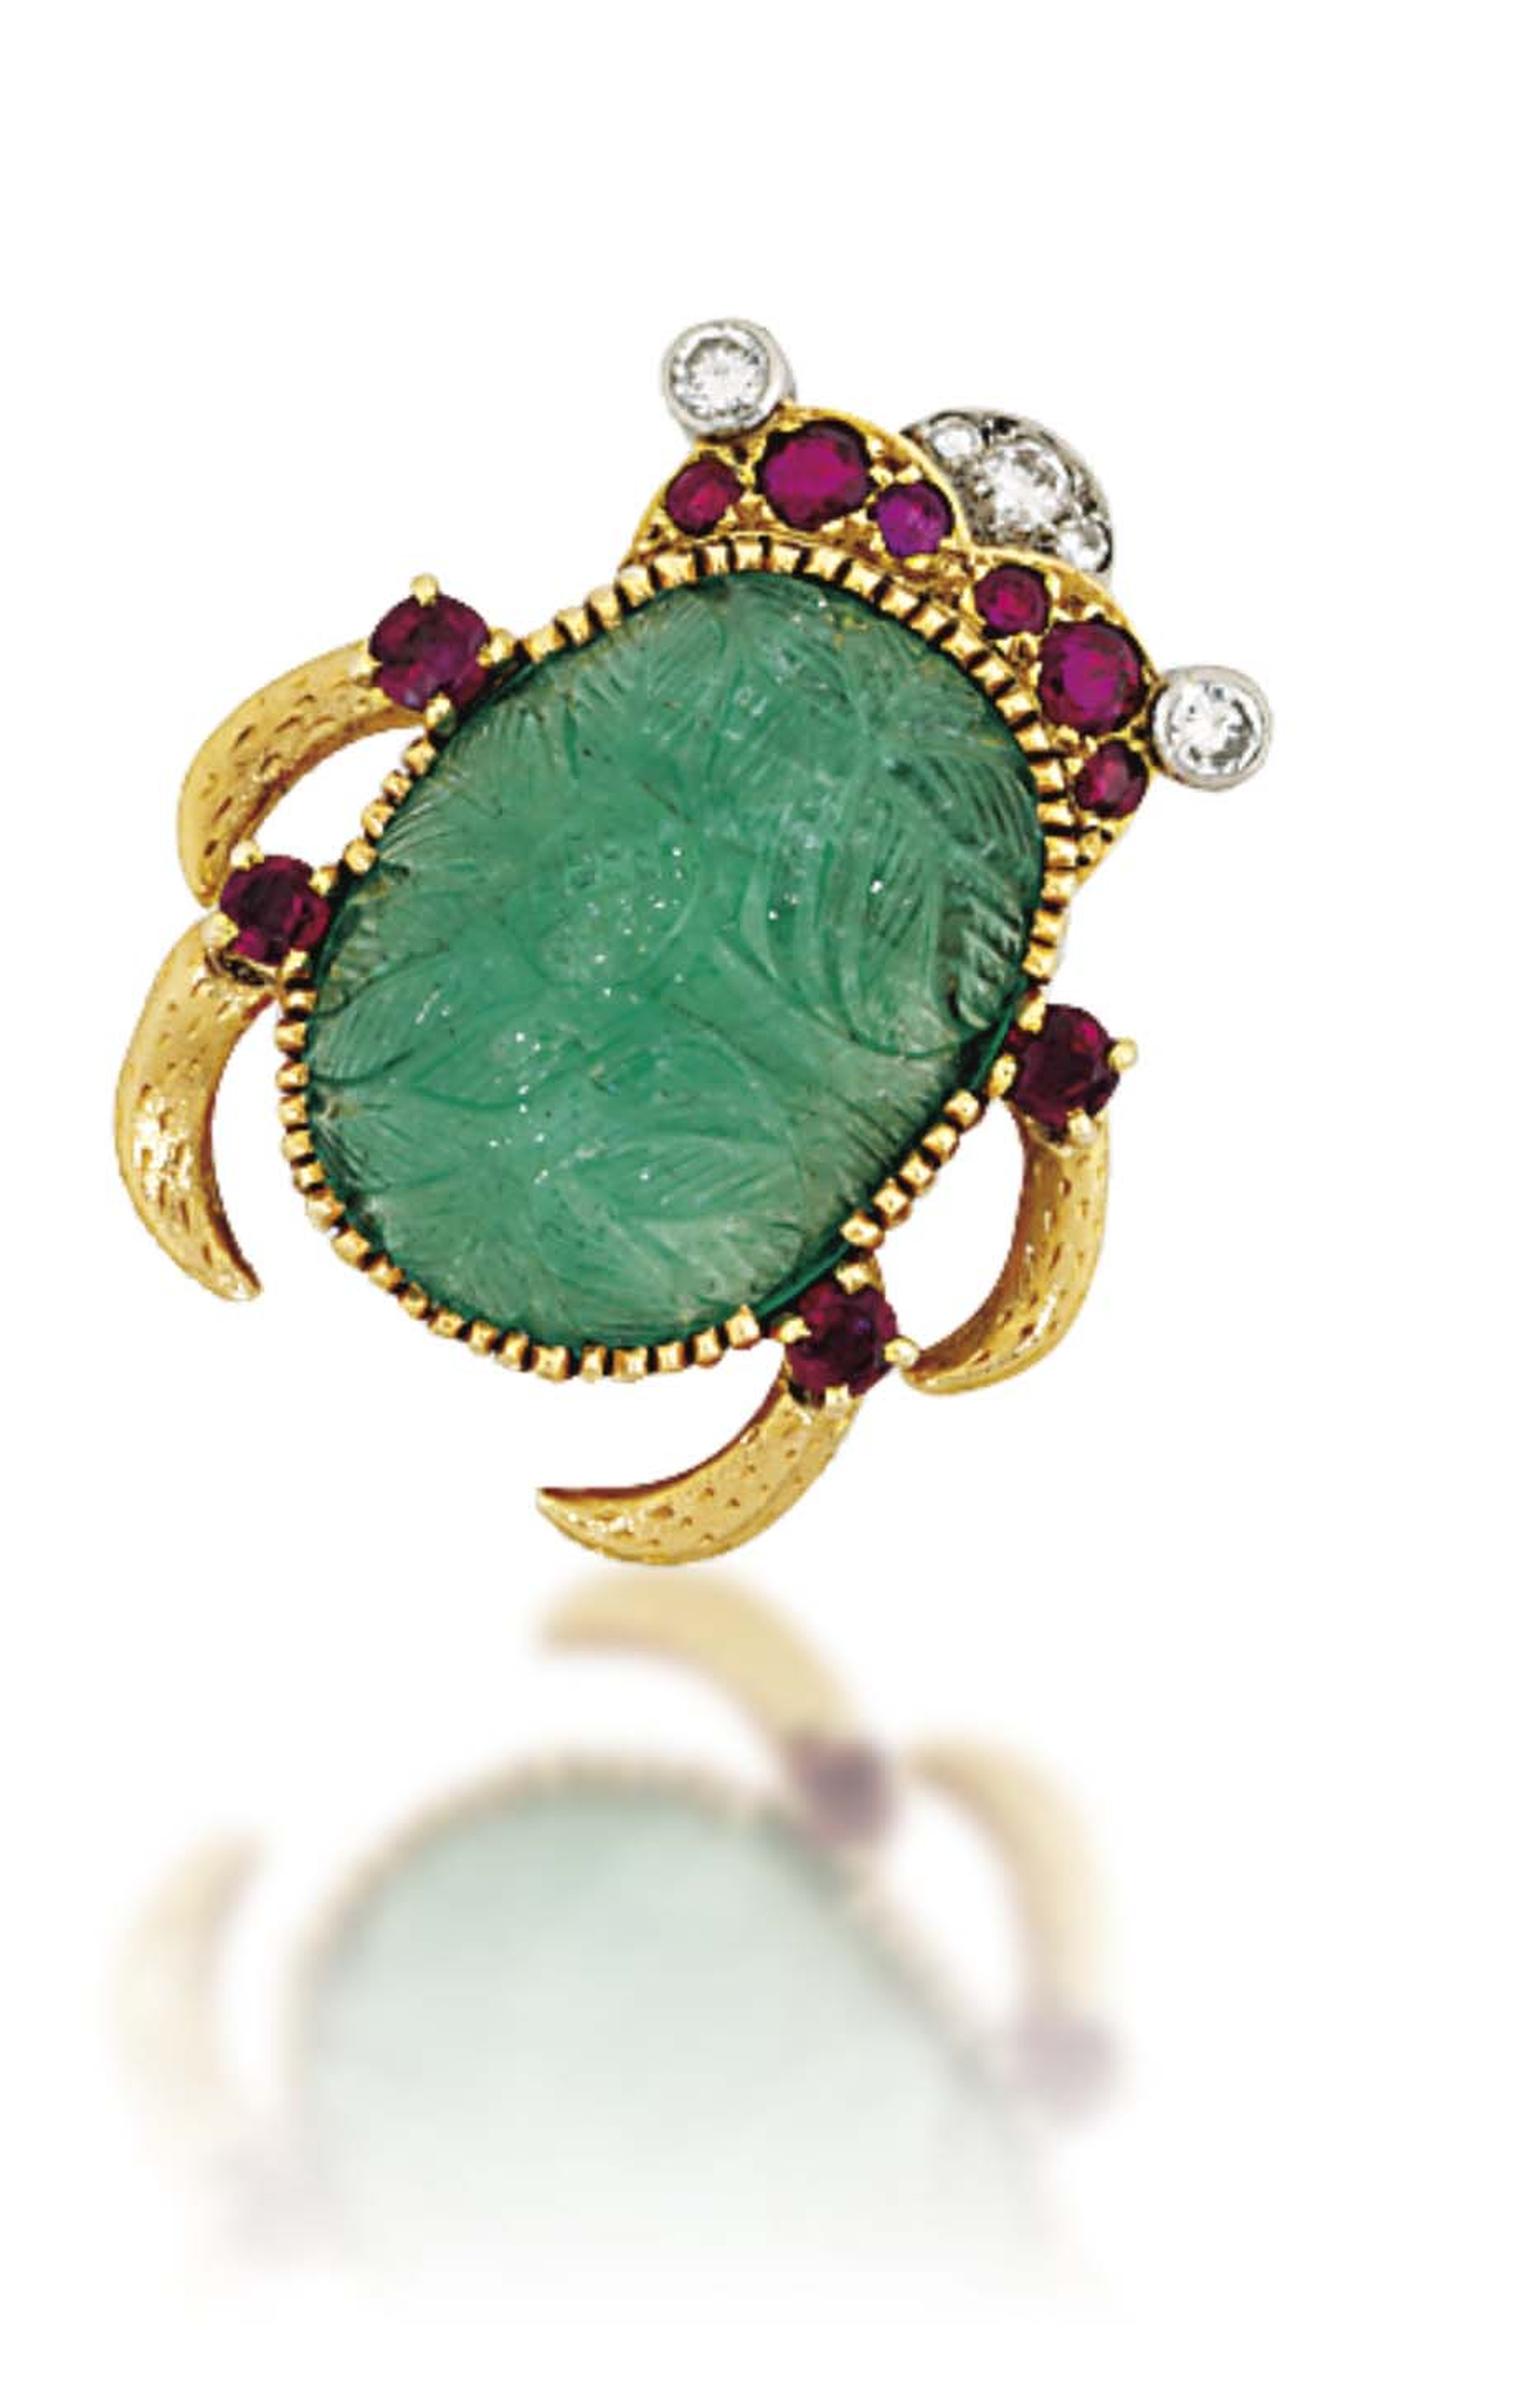 Lot 220 is an emerald, ruby and diamond Scarab brooch signed by Cartier (estimate: £8,000-12,000). Christie's Important Jewels Sale on 26 November at King Street in London.